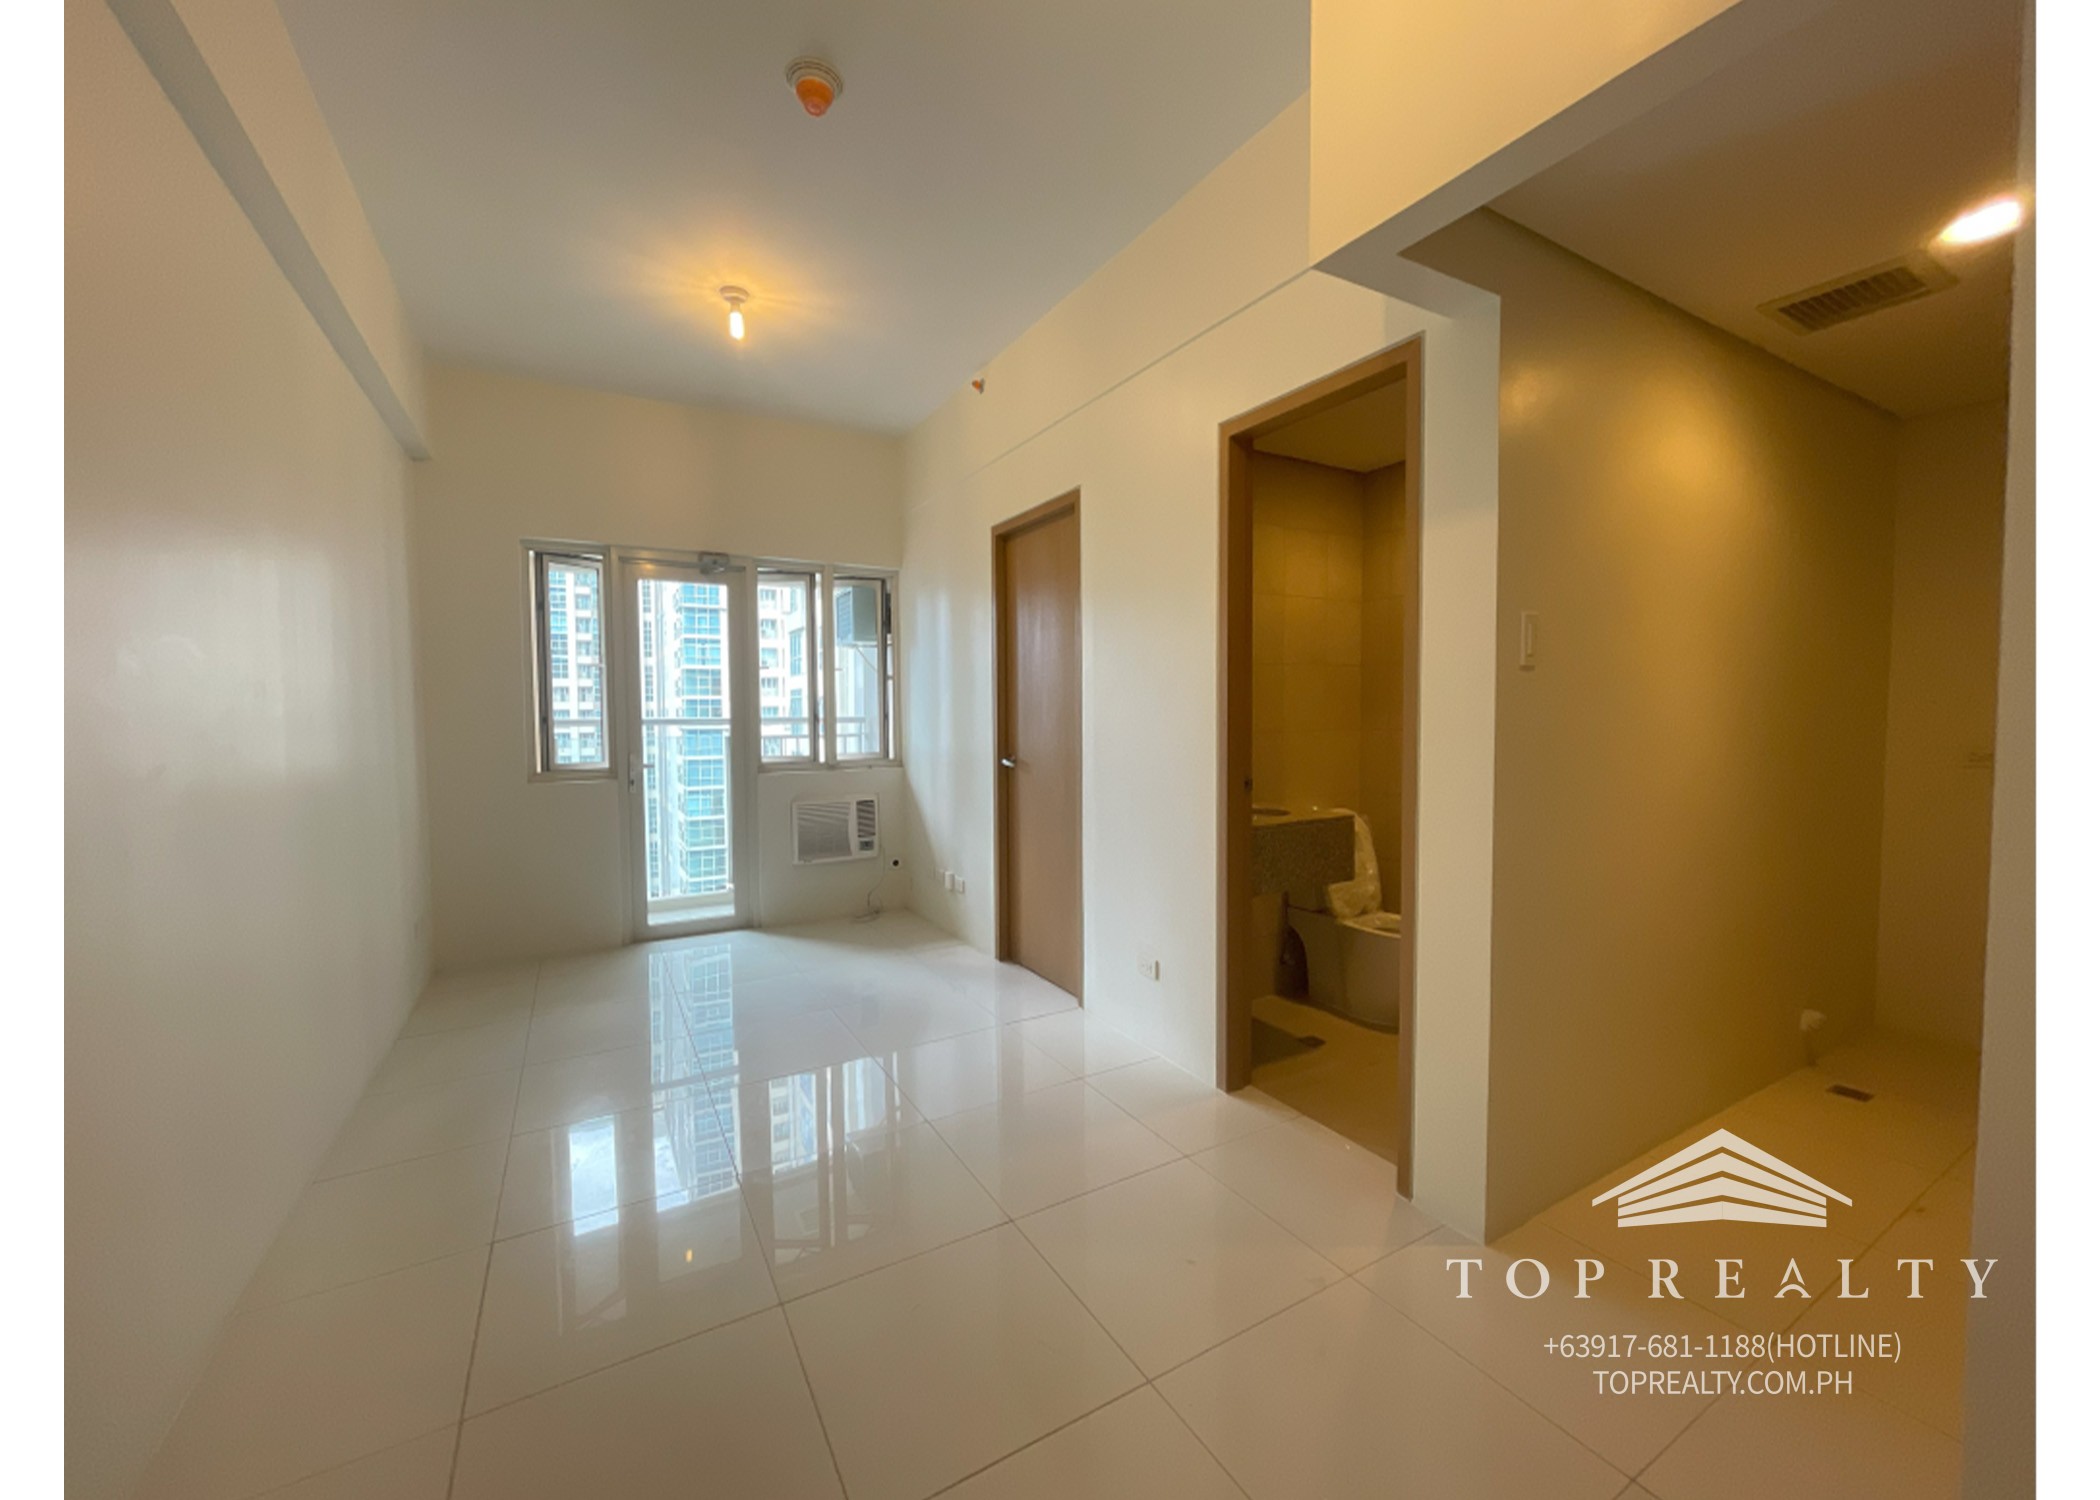 DR88-000799 – Time Square West | Experience the Vibe of this Fresh Minimalist Condo in BGC, Taguig City, Nr. Mitsukoshi, Uptown Mall, SM Aura